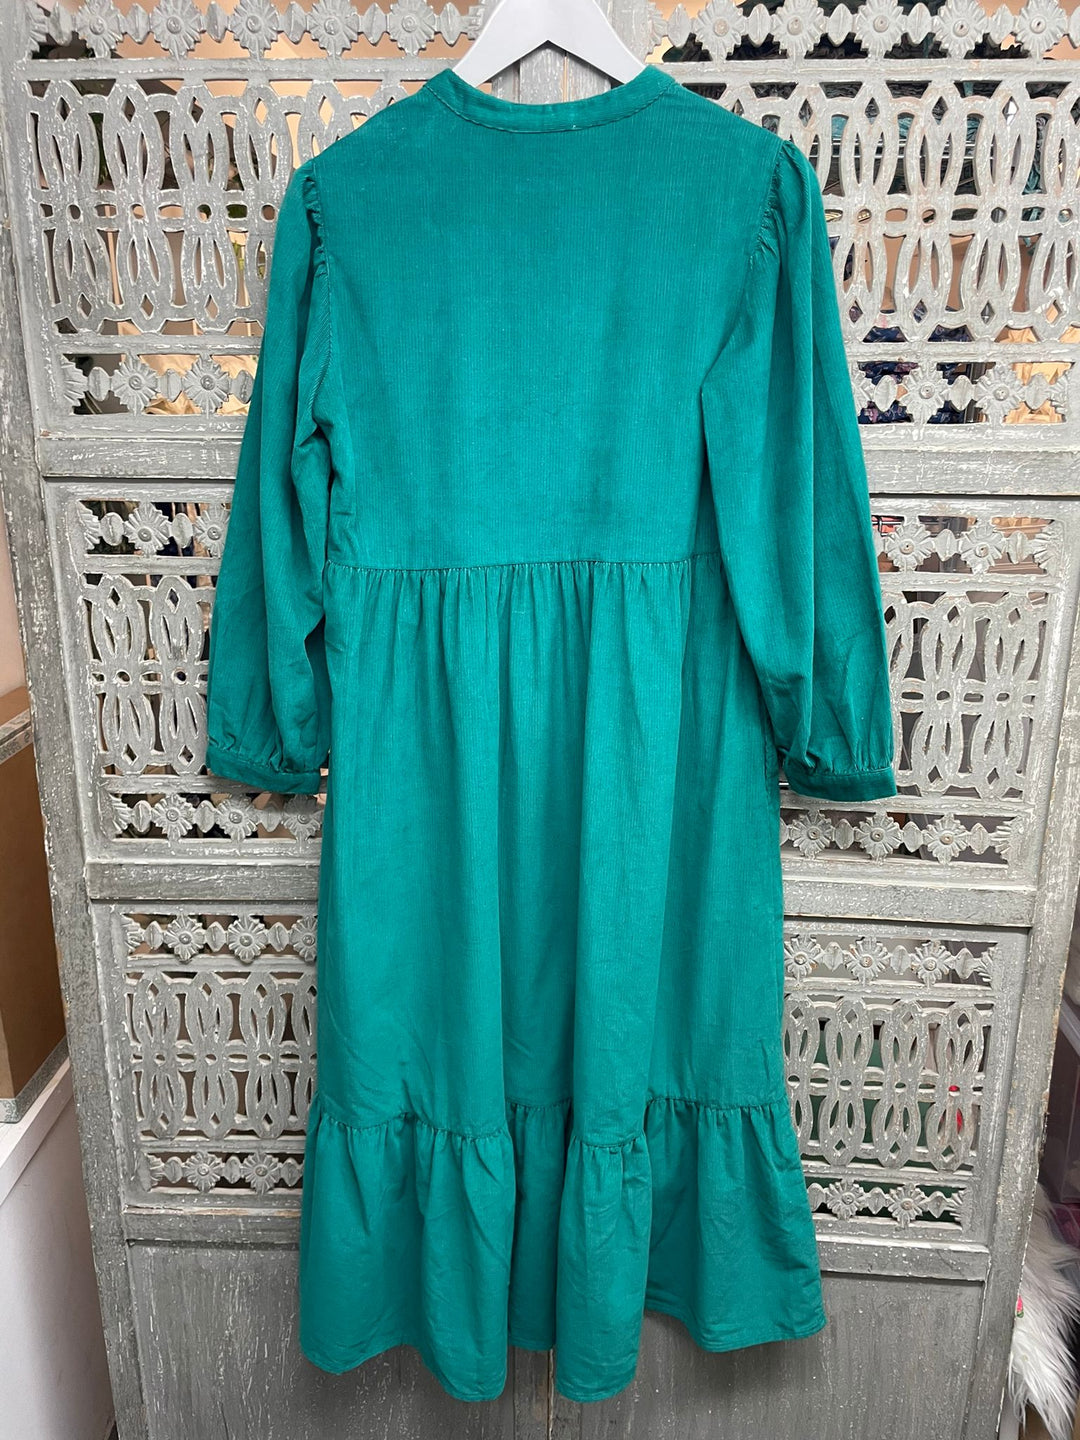 Sample 58 NO RETURNS - size 10 Florence cord dress in peacock